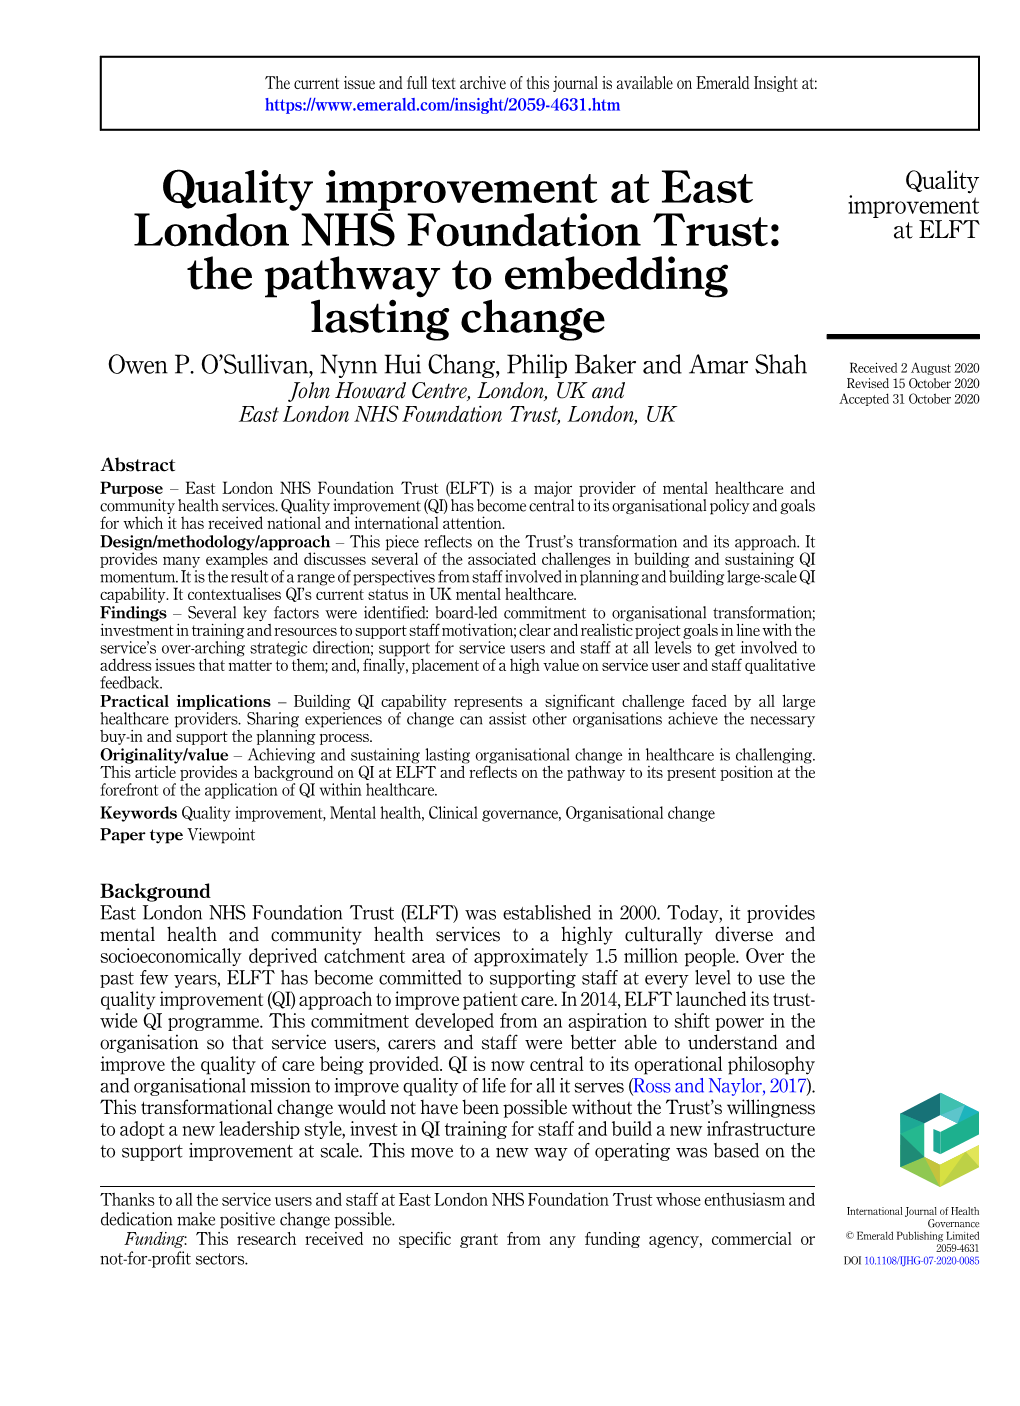 Quality Improvement at East London NHS Foundation Trust: the Pathway to Embedding Lasting Change